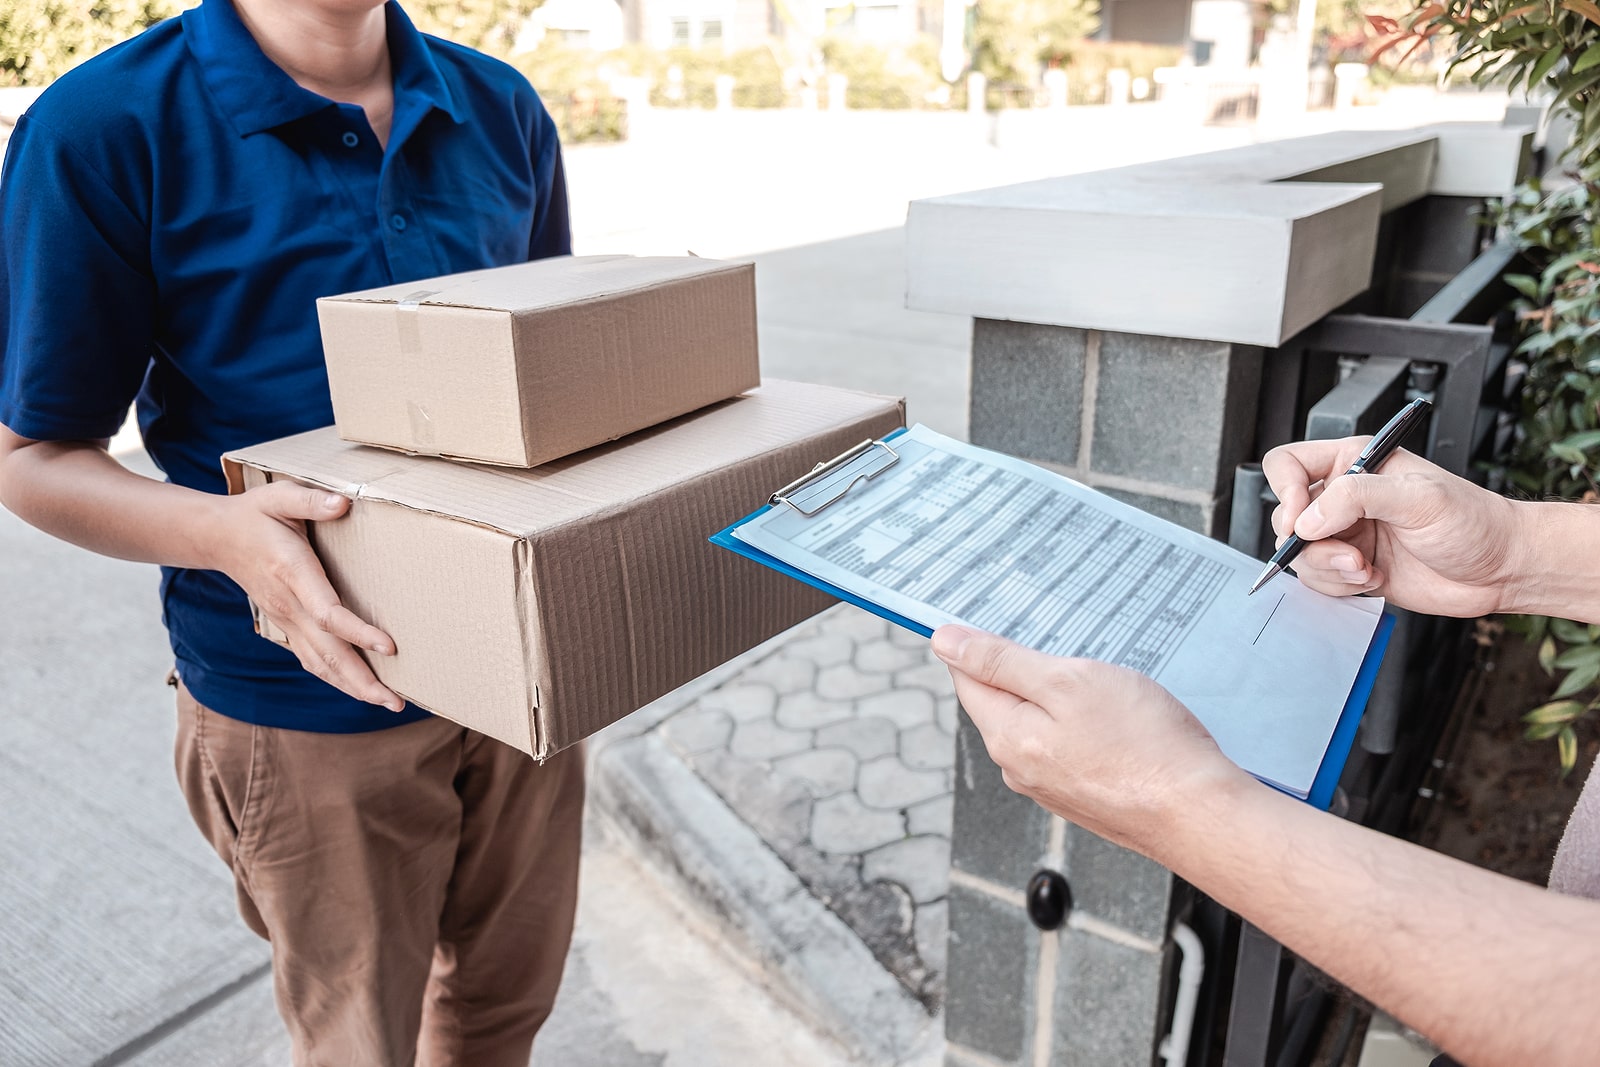 Demystifying Parcel Deliveries: What You Need to Know